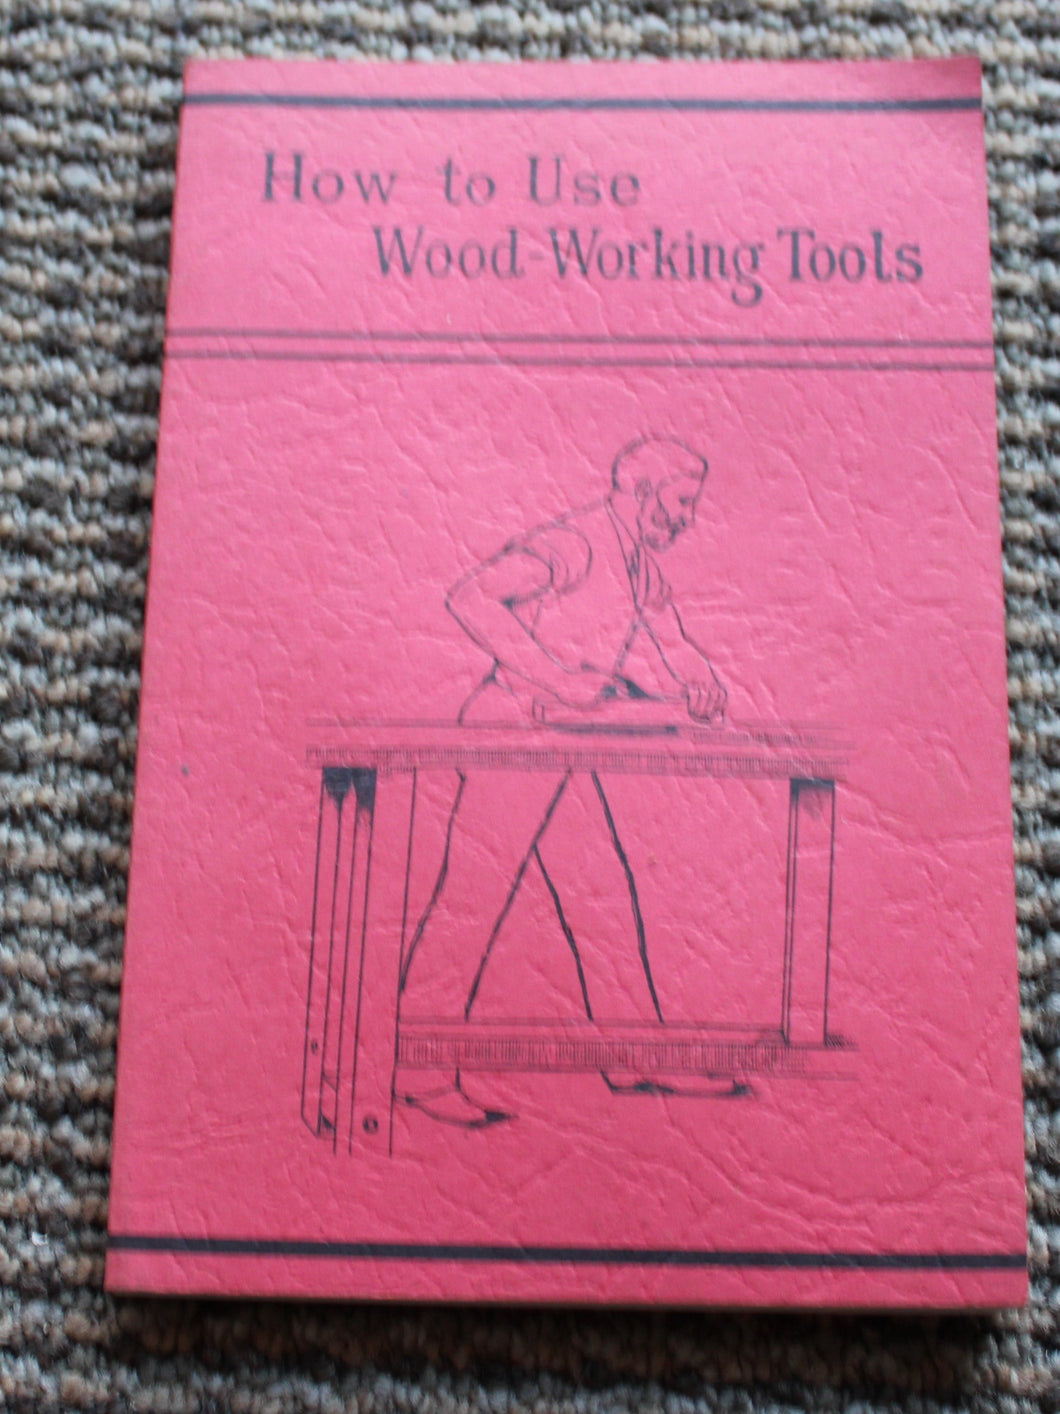 How to Use Wood-Working Tools, A Manual, Reprint of 1882 Booklet